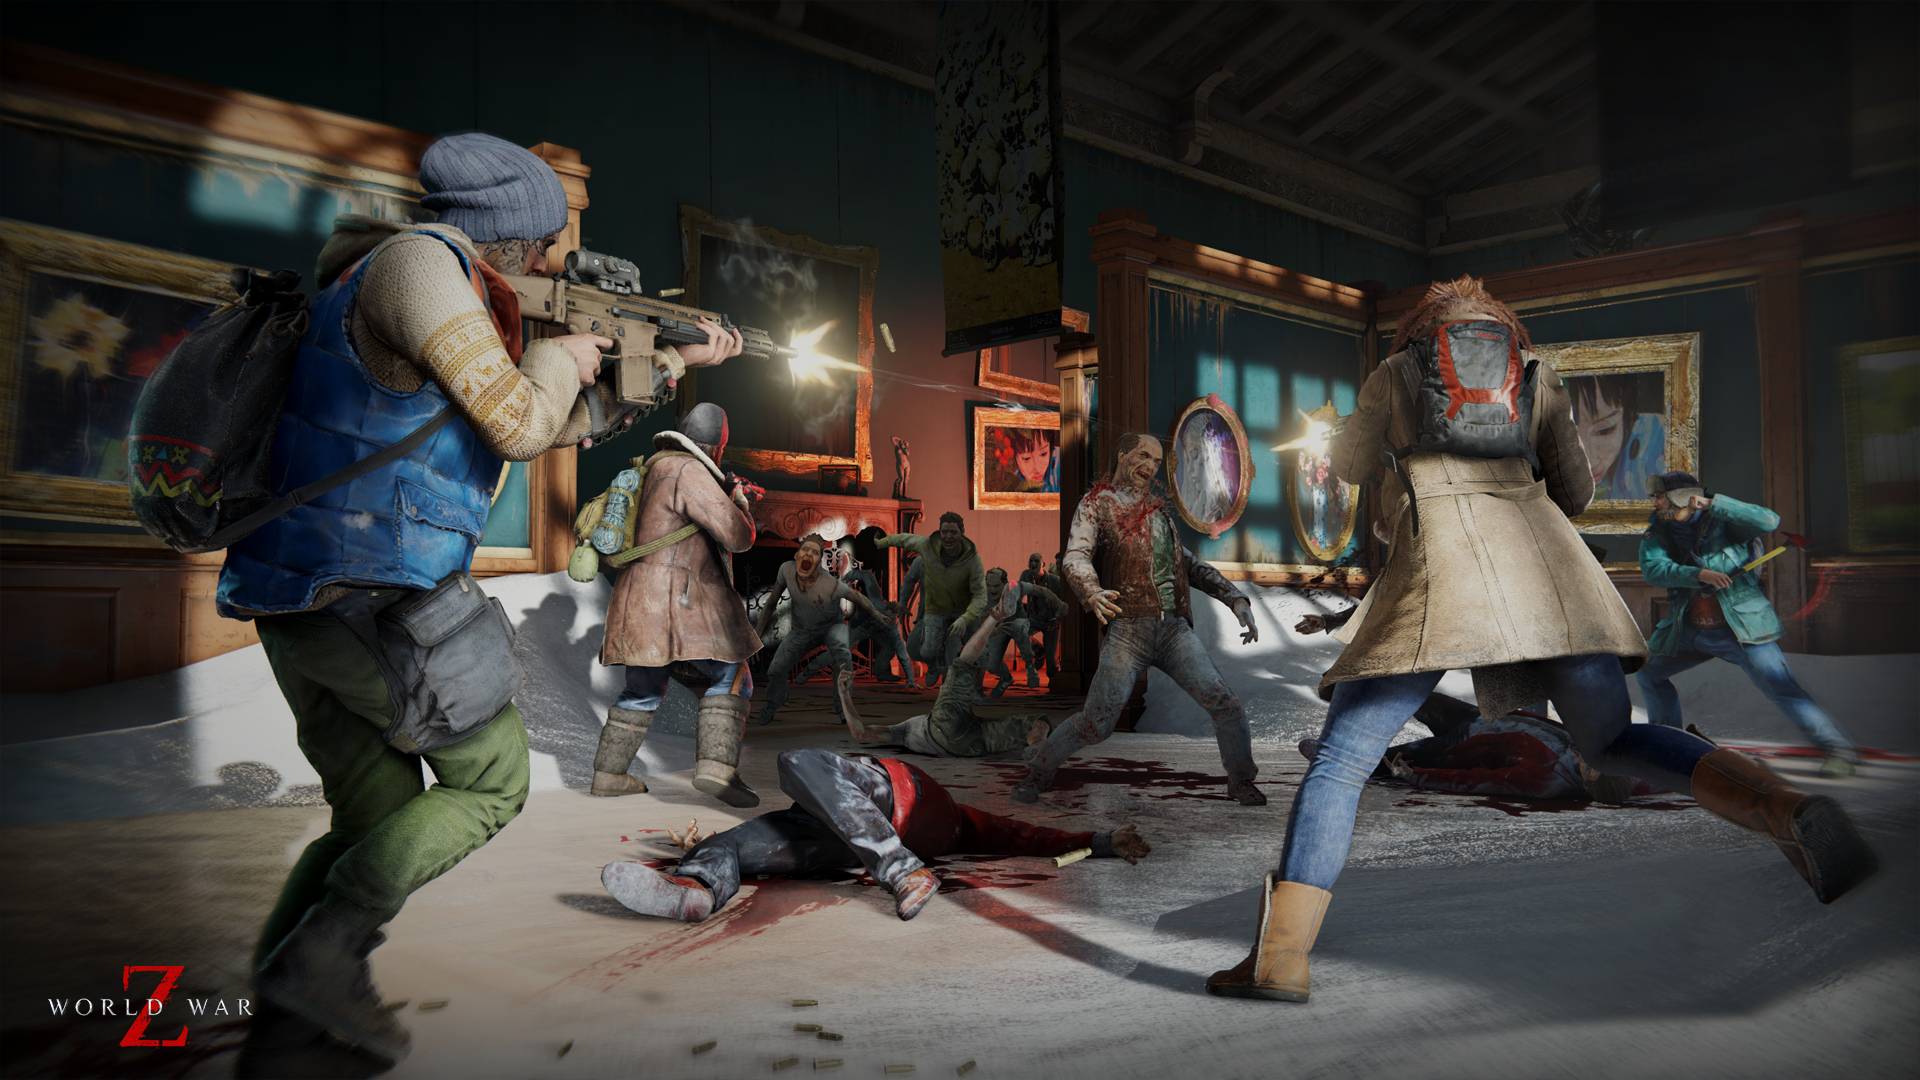 The Daily Crate | Gaming: World War Z: The Video Game with a Left 4 Dead Flavor